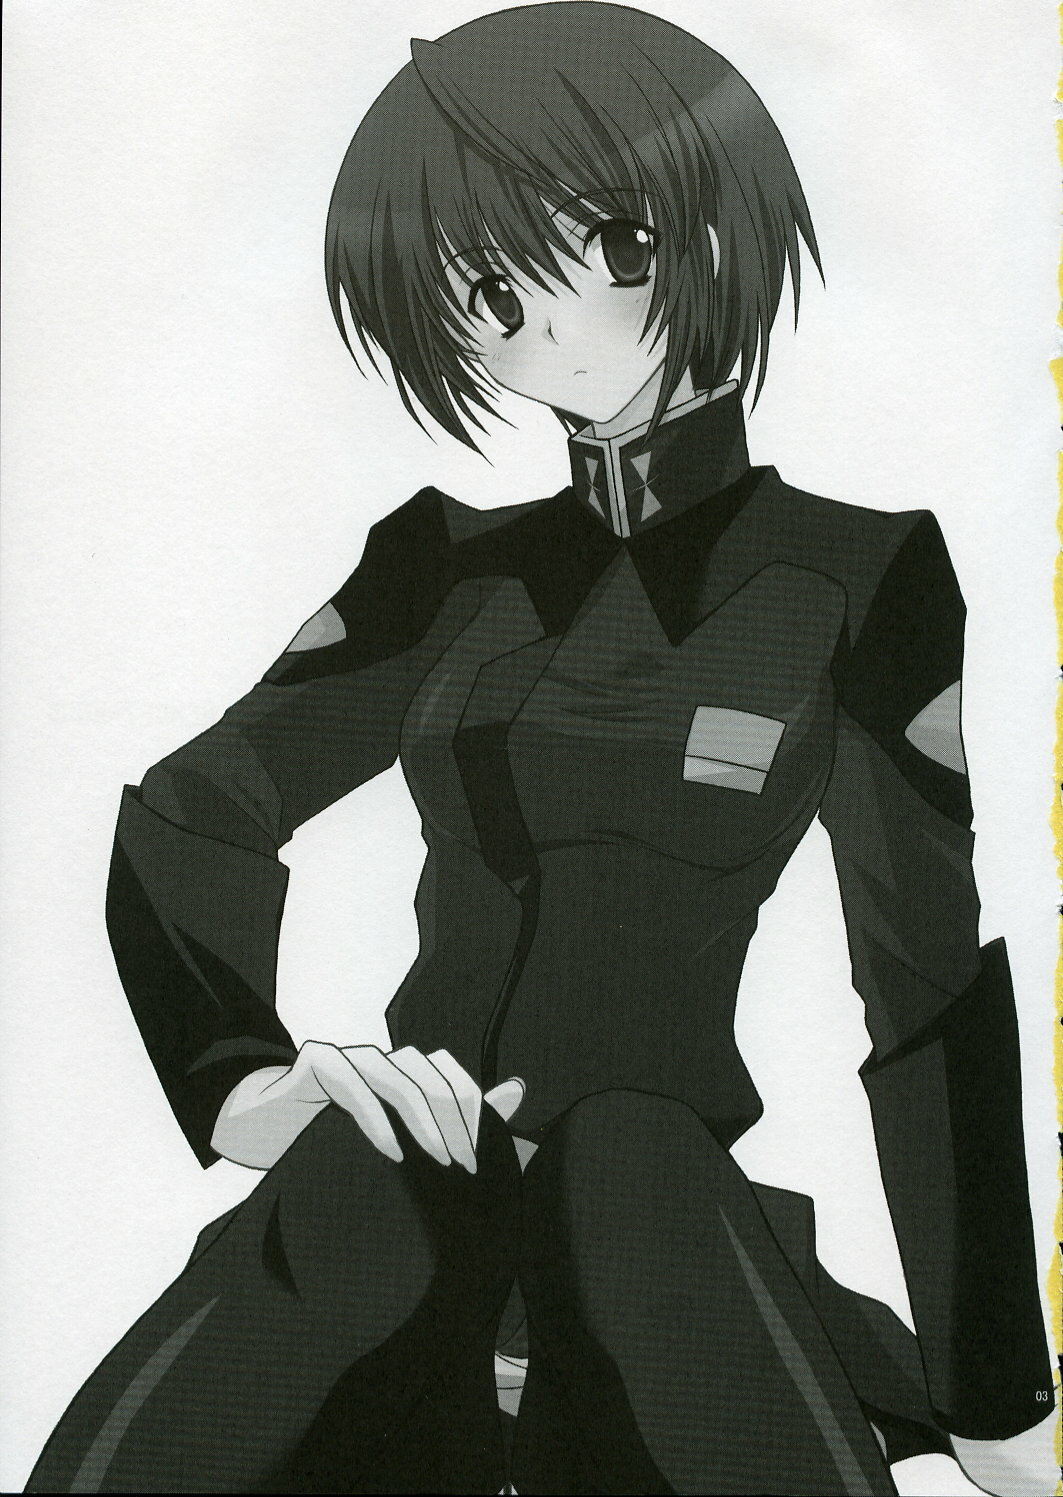 (SC28) [YLANG-YLANG (Ichie Ryouko)] RENDEZ-VOUS (Mobile Suit Gundam SEED DESTINY) page 2 full